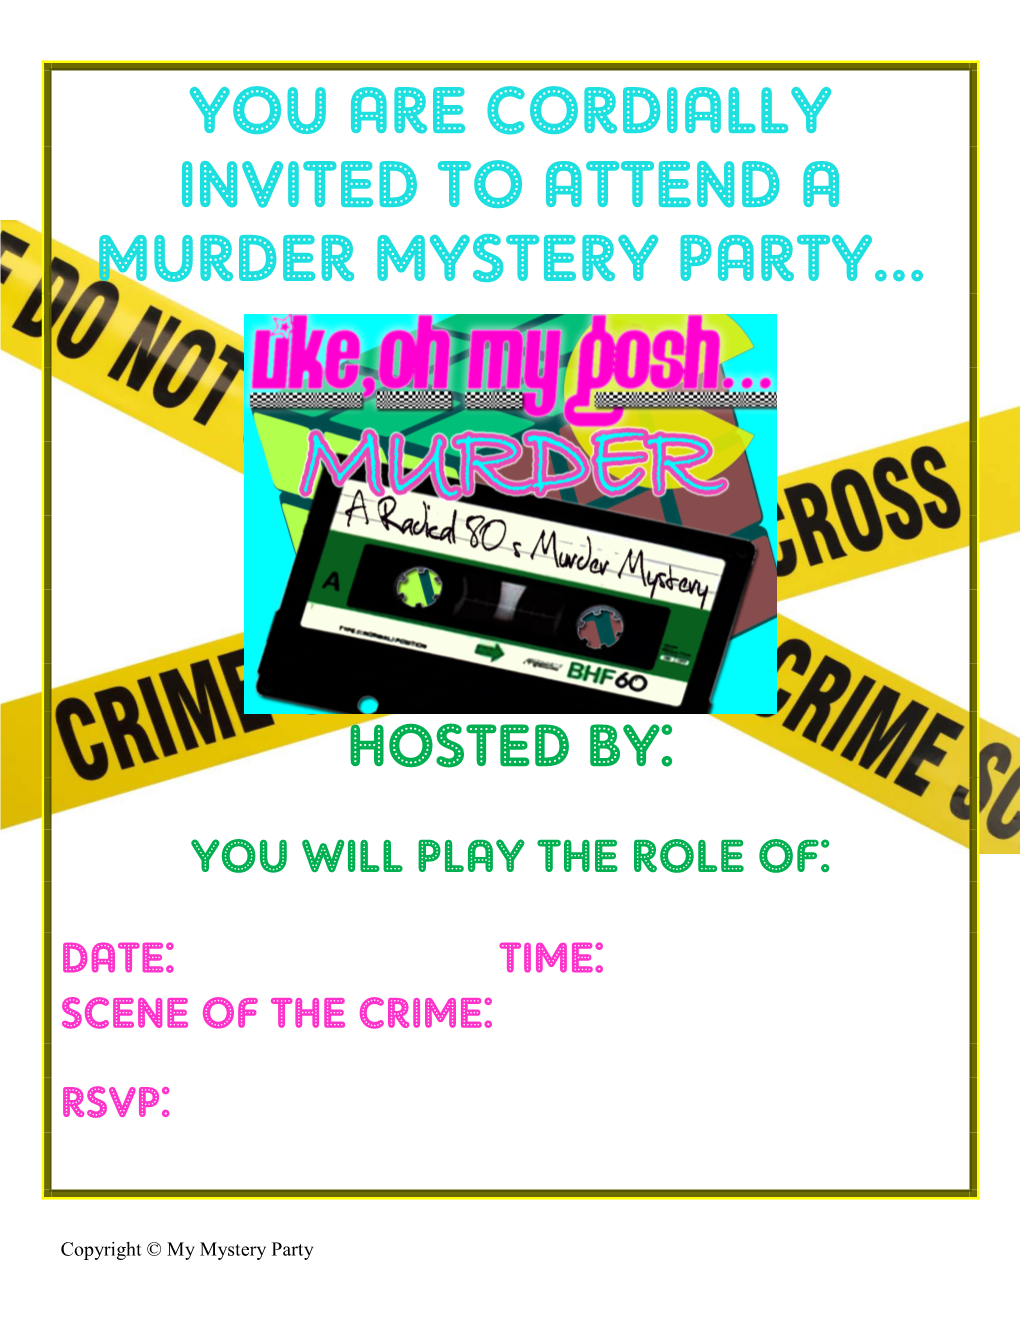 You Are Cordially Invited to Attend a Murder Mystery Party…